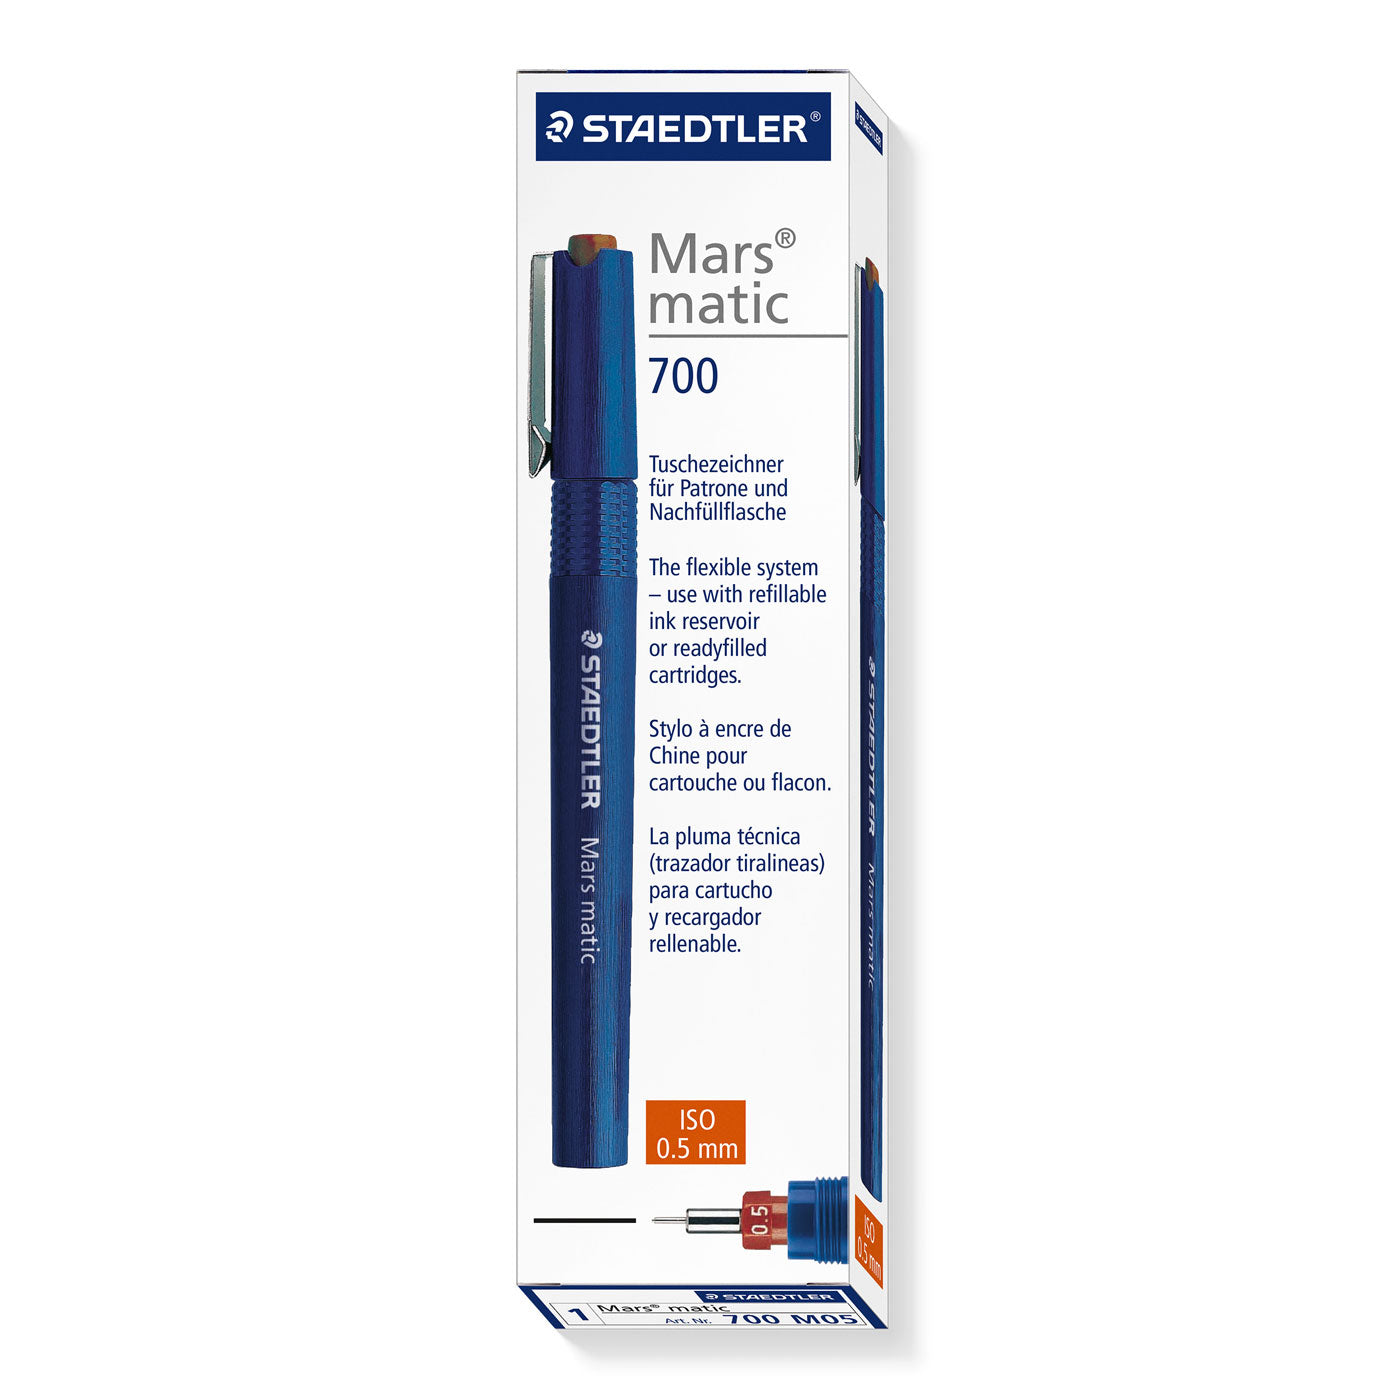 Staedtler Mars Matic 700 M05 Technical Drawing Pen 0.5mm Box